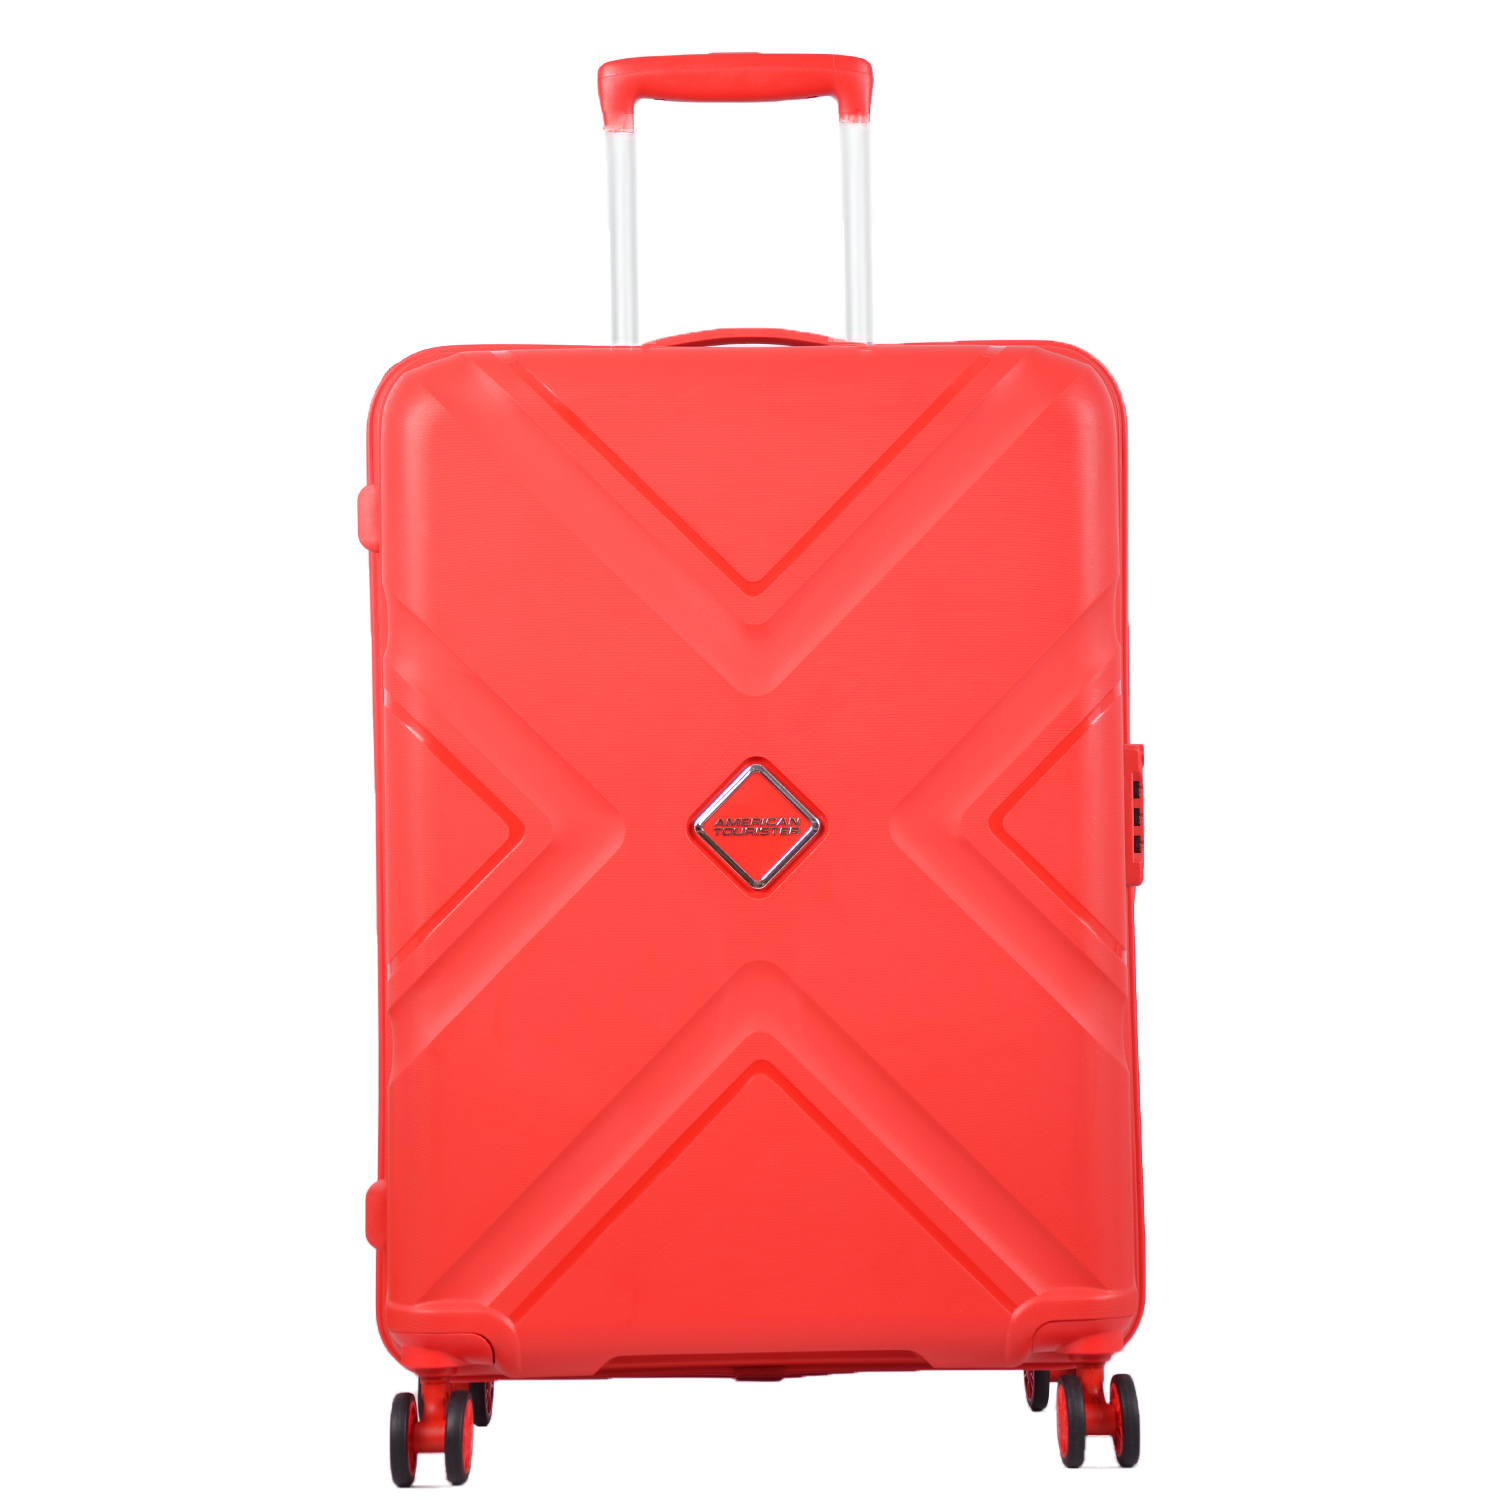 RoshanBags_AMERICAN TOURISTER KROSS PLUS DUAL WHEEL STROLLY RED